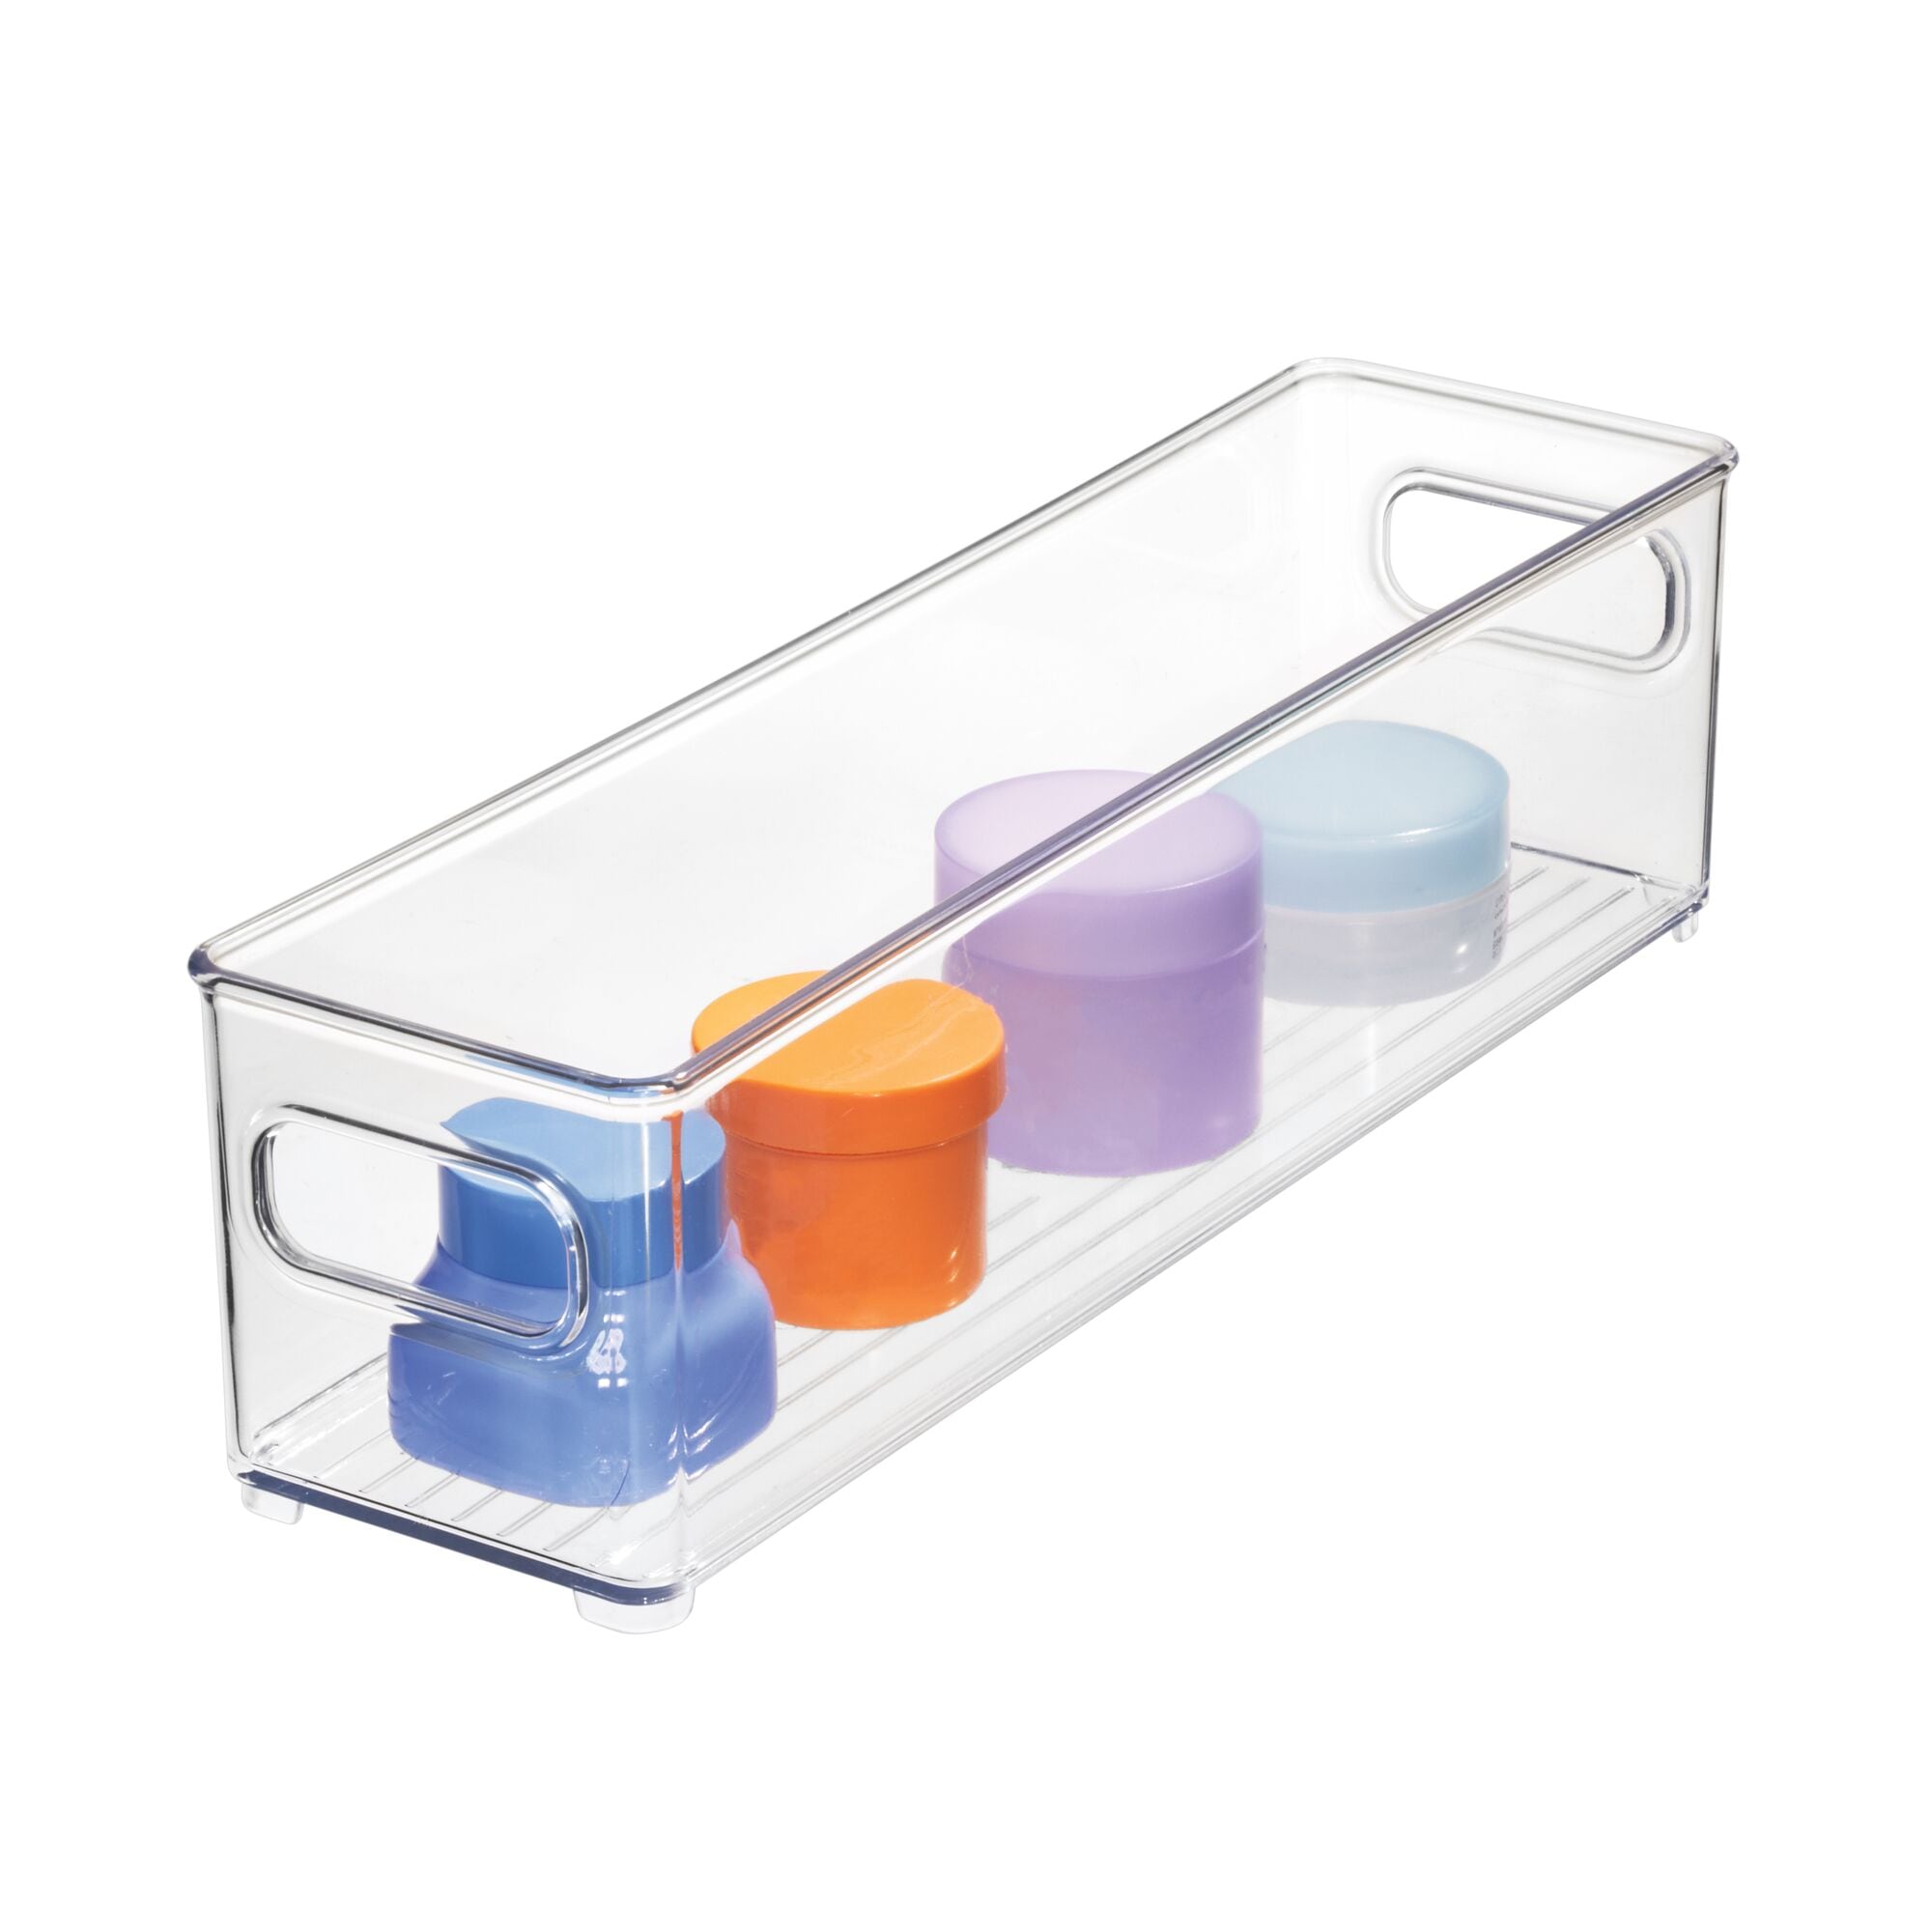 Ichc Set Of 4 Collapsible Storage Containers - Space Saving Food